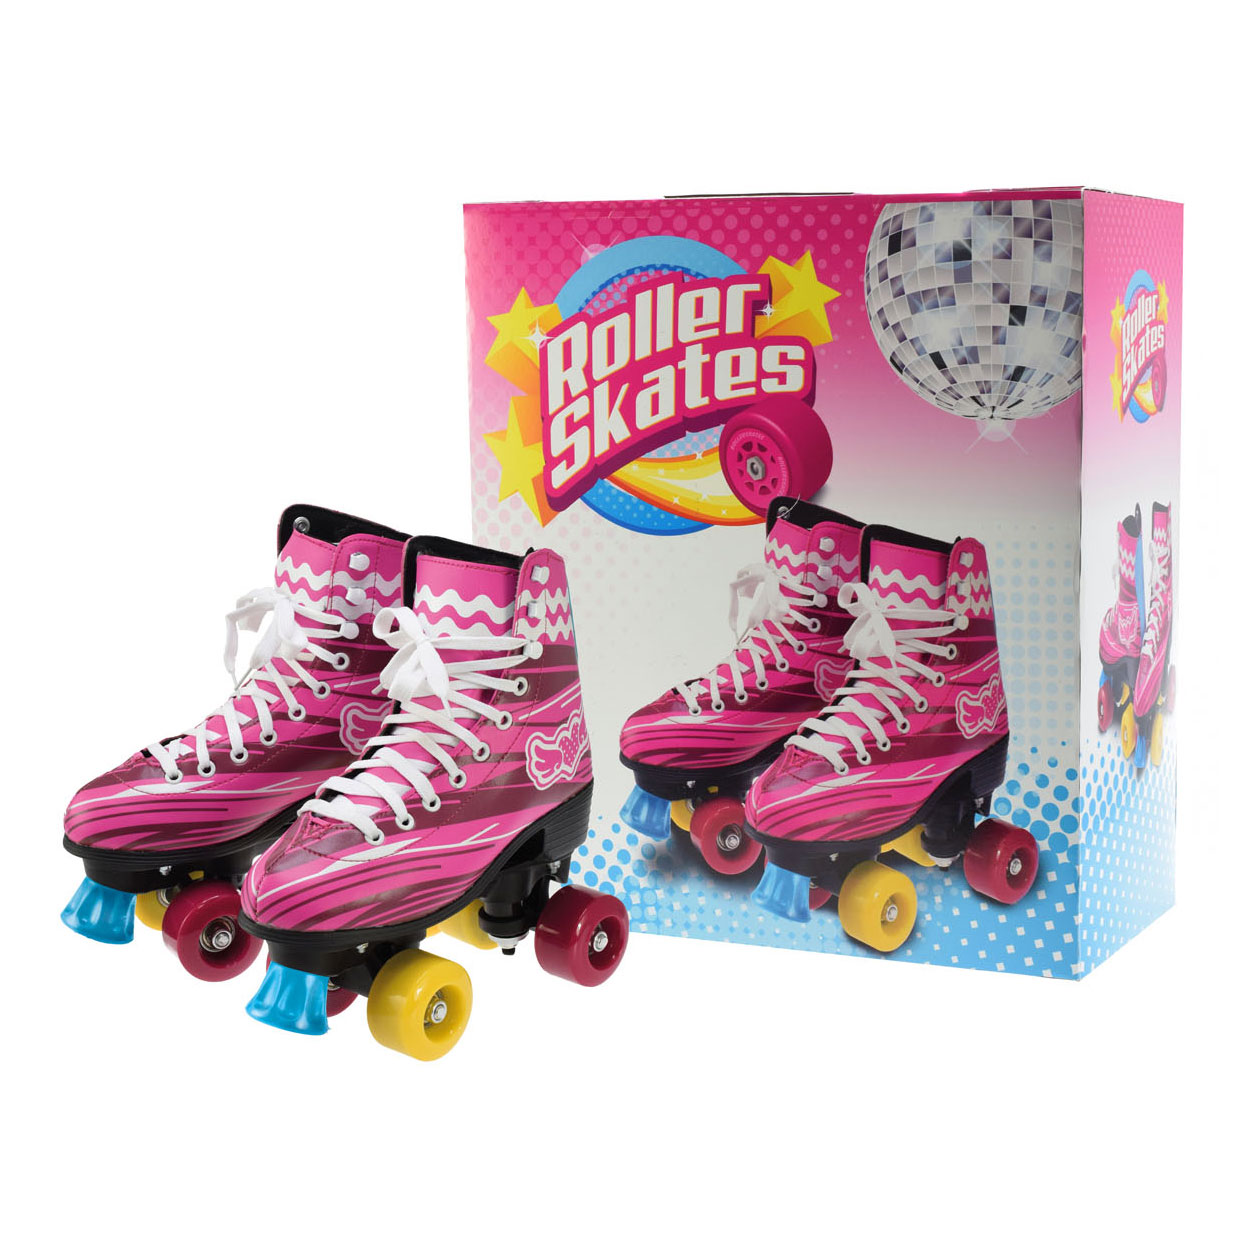 zij is Ineenstorting maximaliseren Rolling skates, size 33 | Thimble Toys